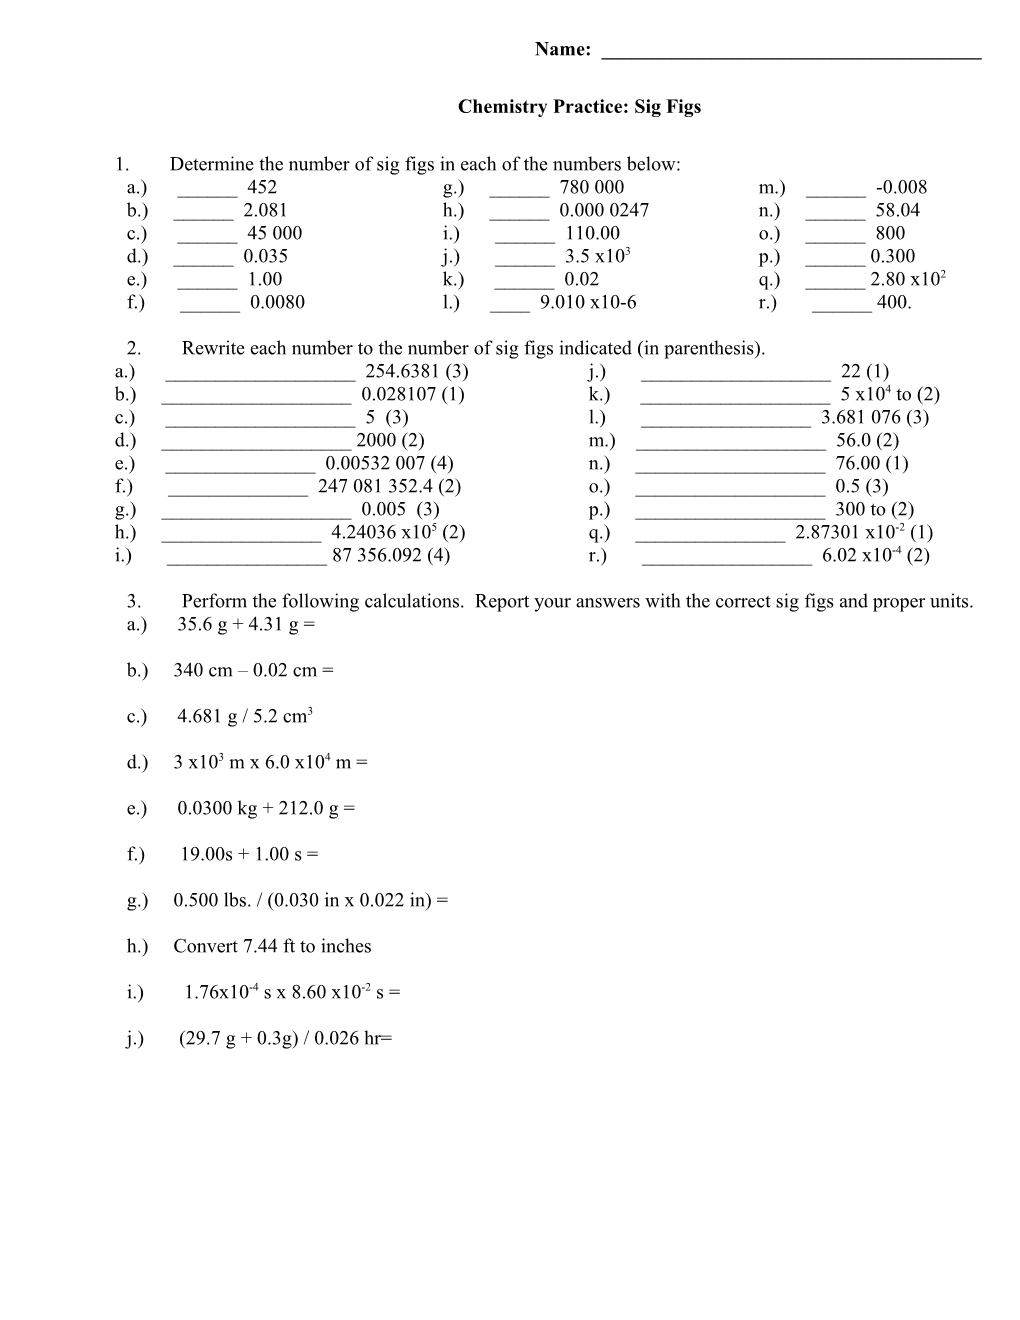 Chemistry Practice: Sig Figs